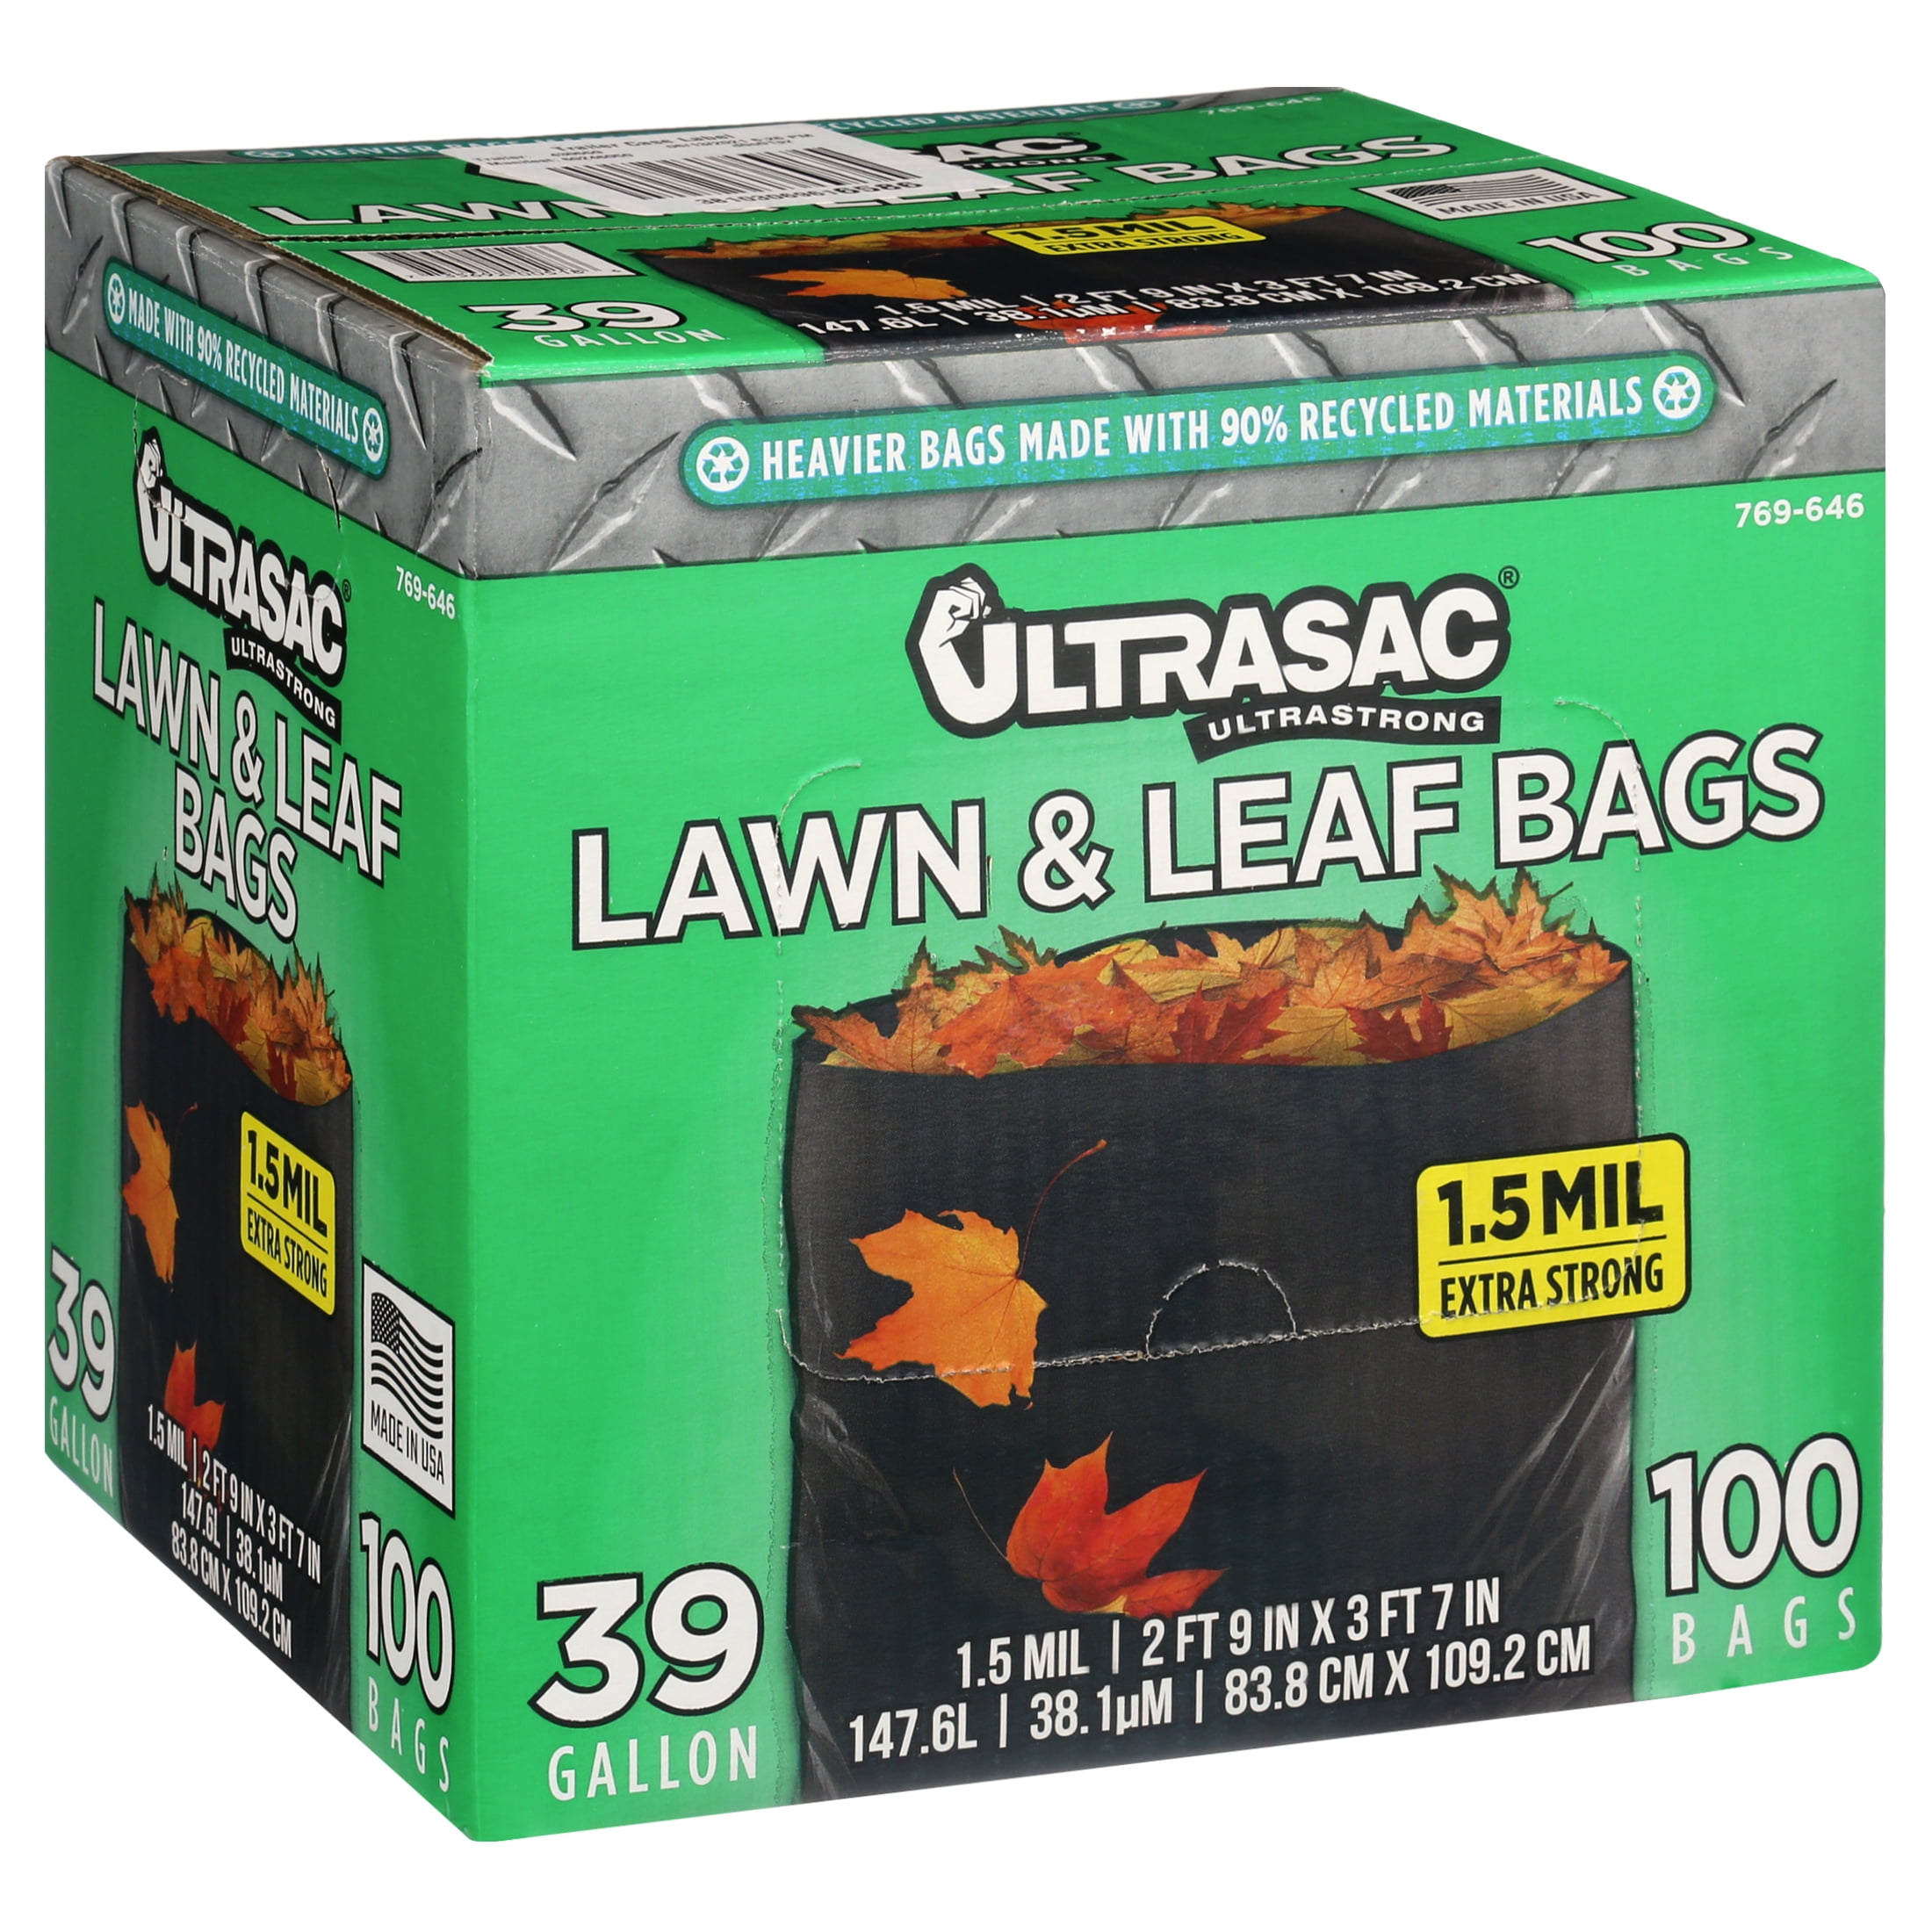 Ultrasac 39 Gal 100 Count - 1 Pack Lawn and Leaf Bags 